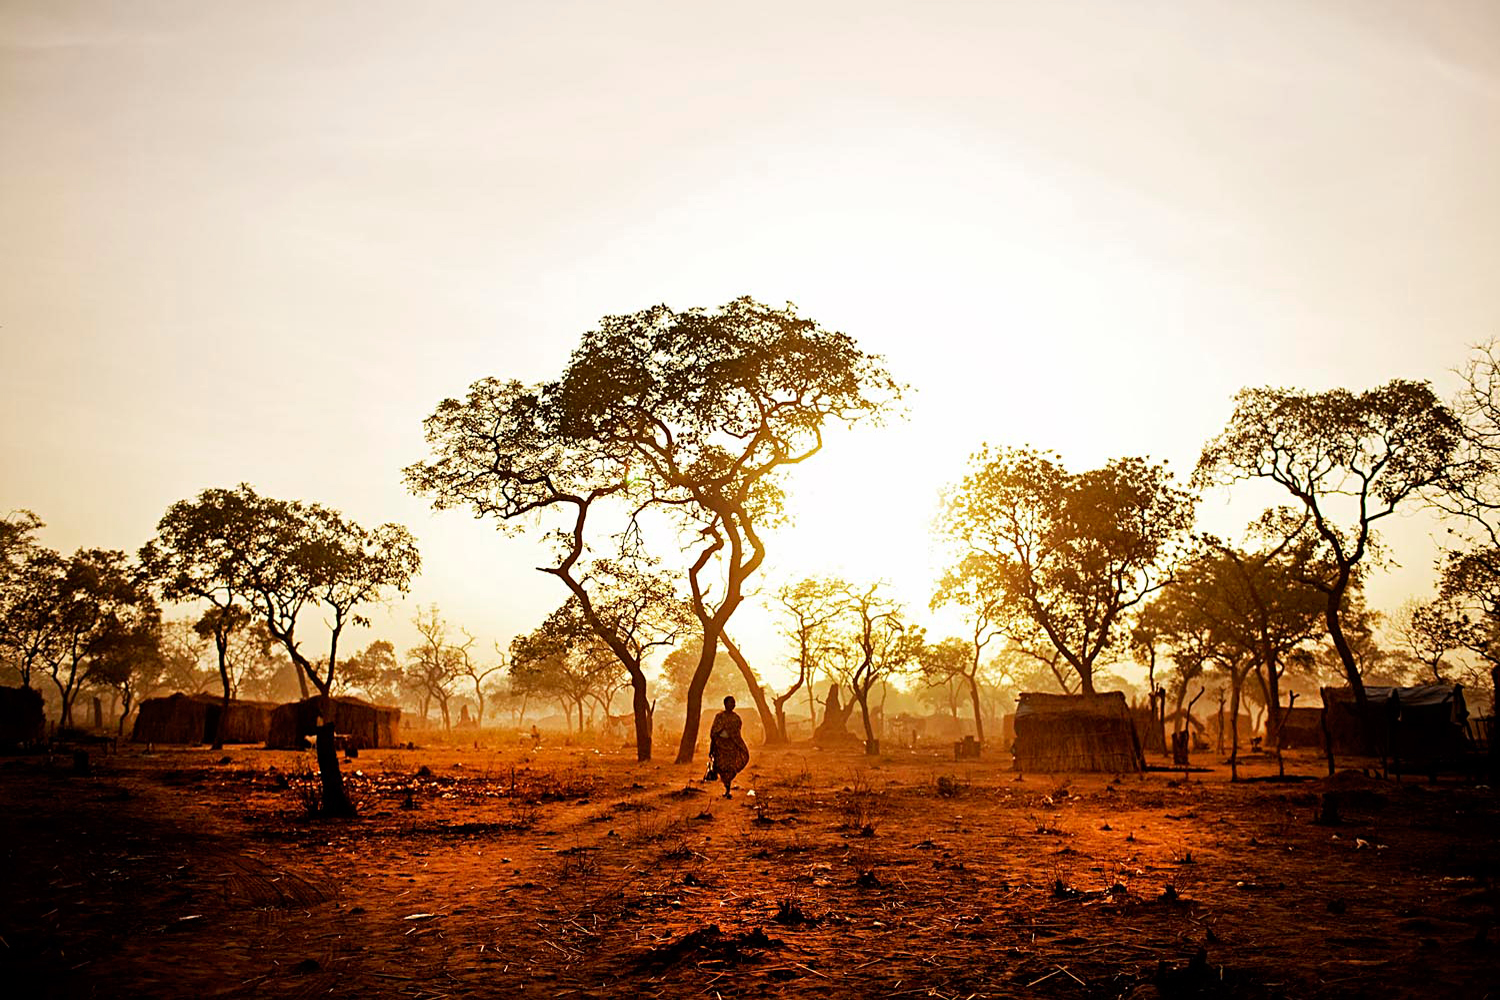 A refugee from the Nuba Mountains wanders through the Yida refugee camp at dawn. People try to accomplish tasks early in the day before the heat sets in.